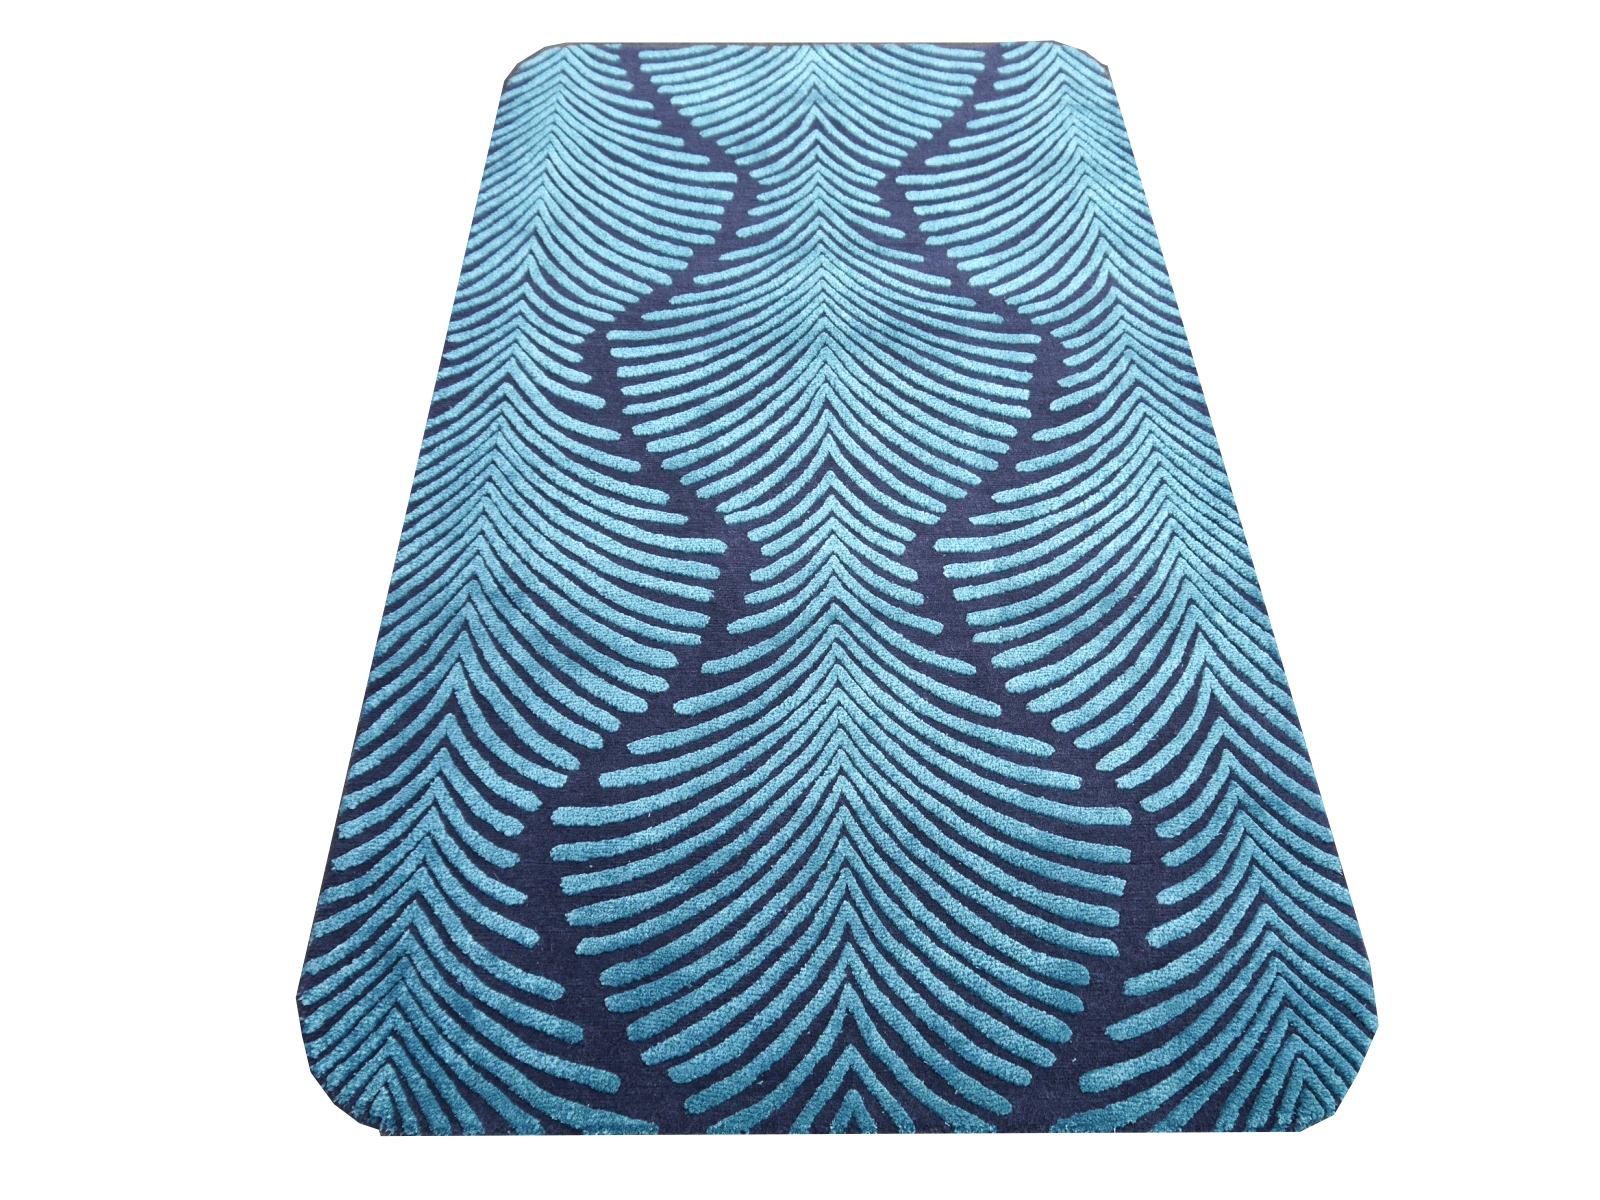 Indian Contemporary Art Deco Zebra Rug Hand Knotted Blue Wool Silk Djoharian Collection For Sale